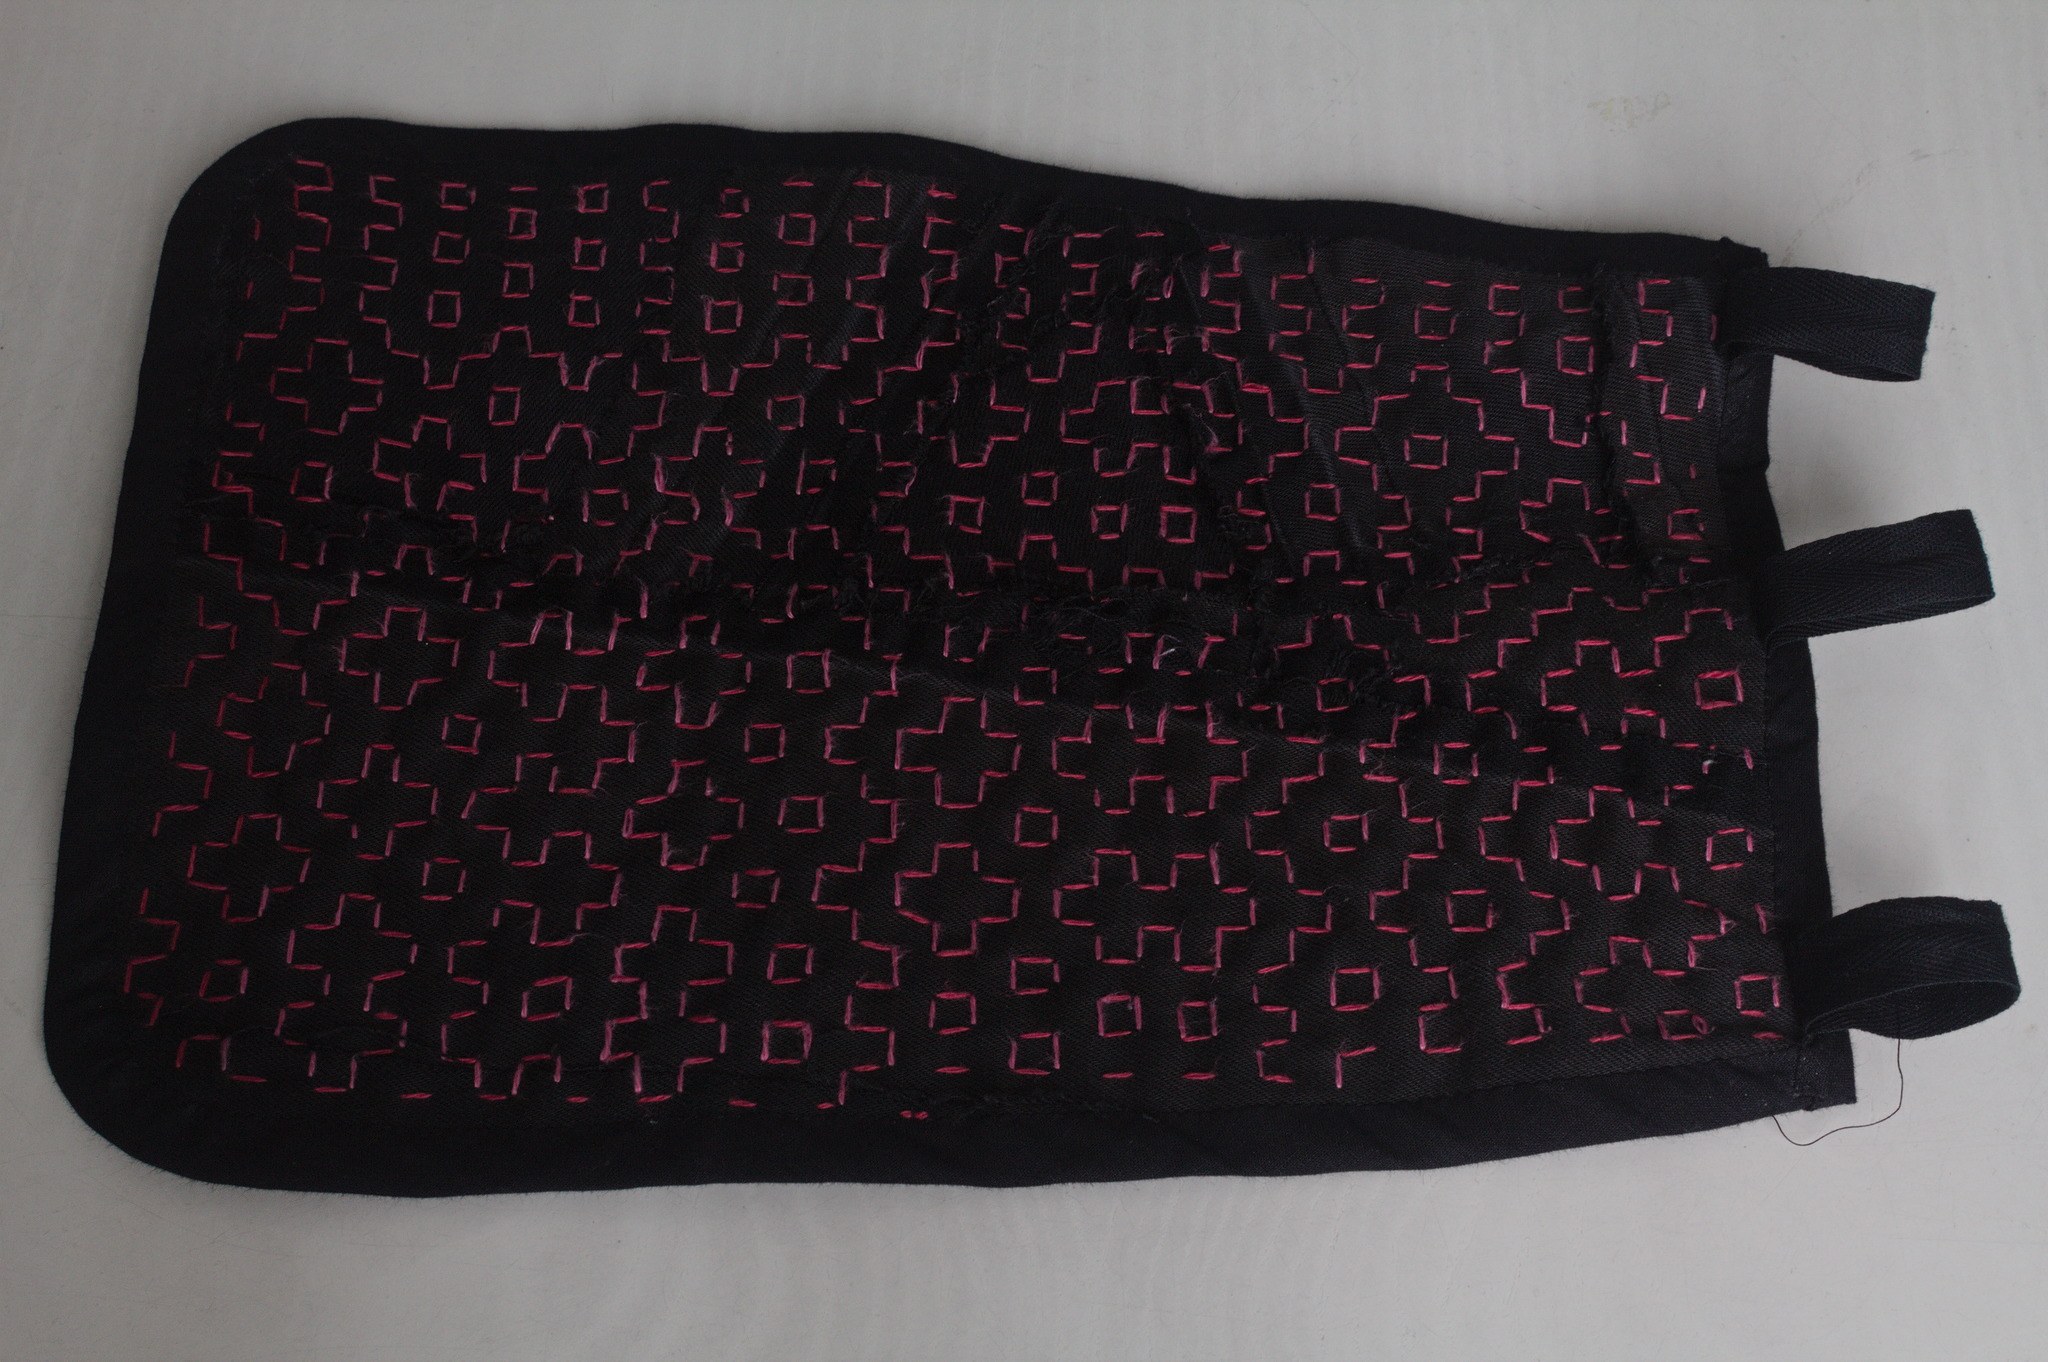 The back of the pocket, showing another random pattern in two
different shades of pink for the vertical and horizontal lines of
stitching.